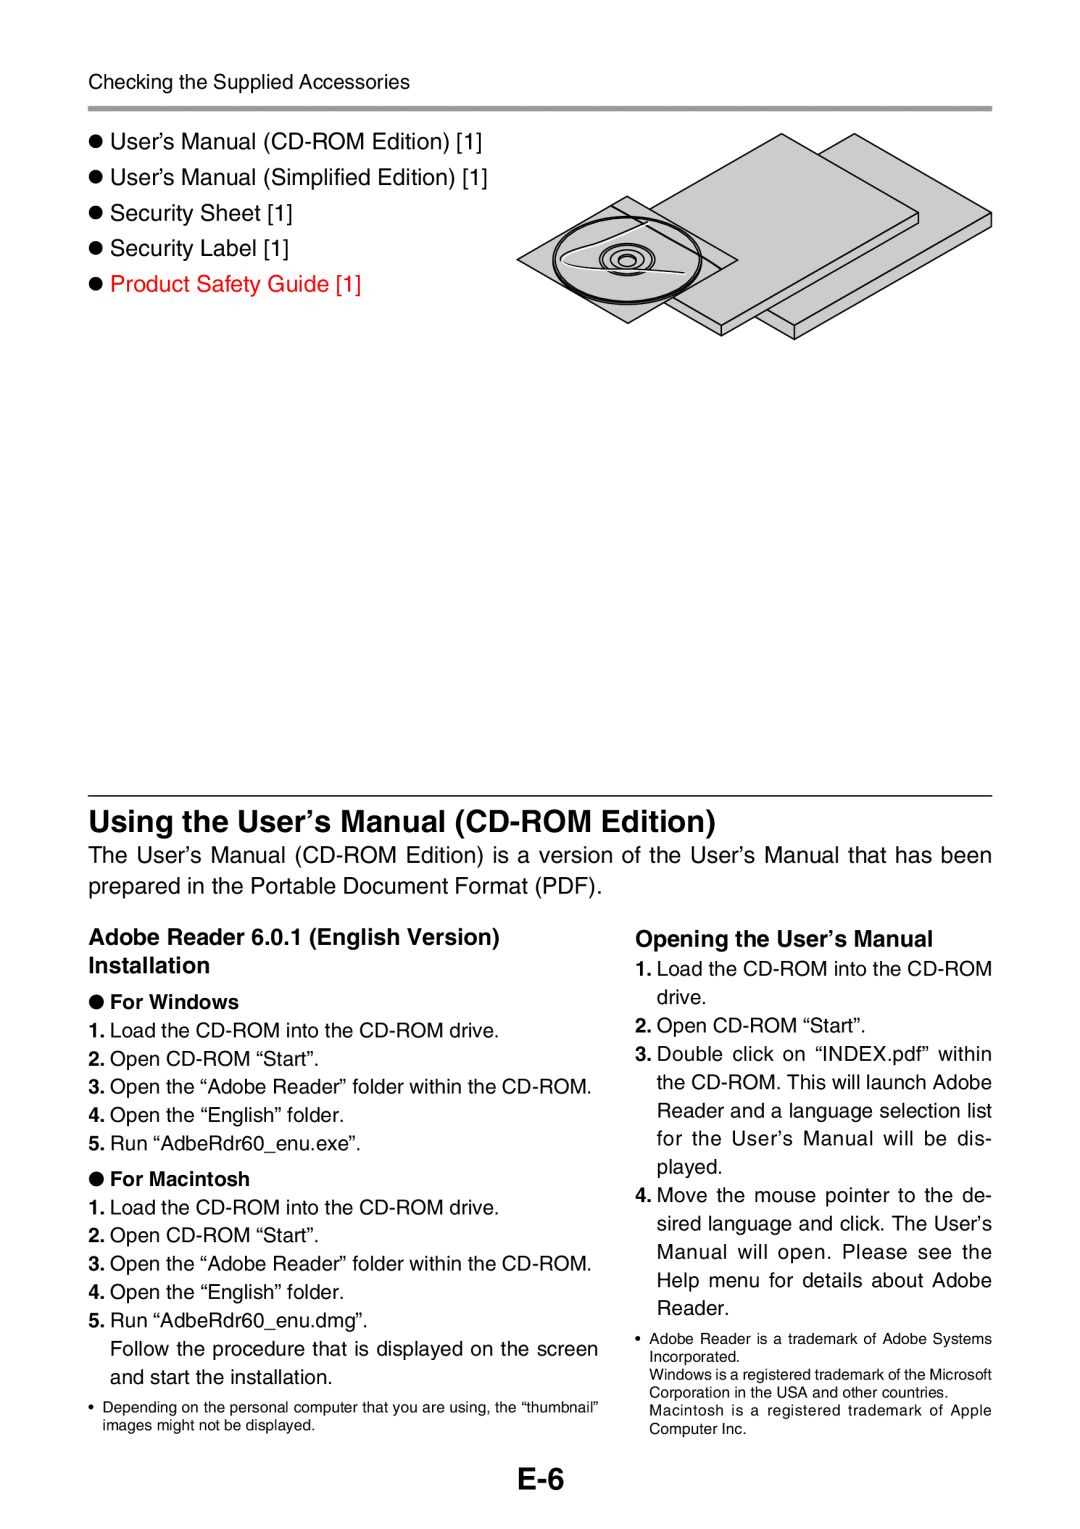 3M PX5 user manual Using the User’s Manual CD-ROM Edition, User’s Manual CD-ROM Edition User’s Manual Simplified Edition 